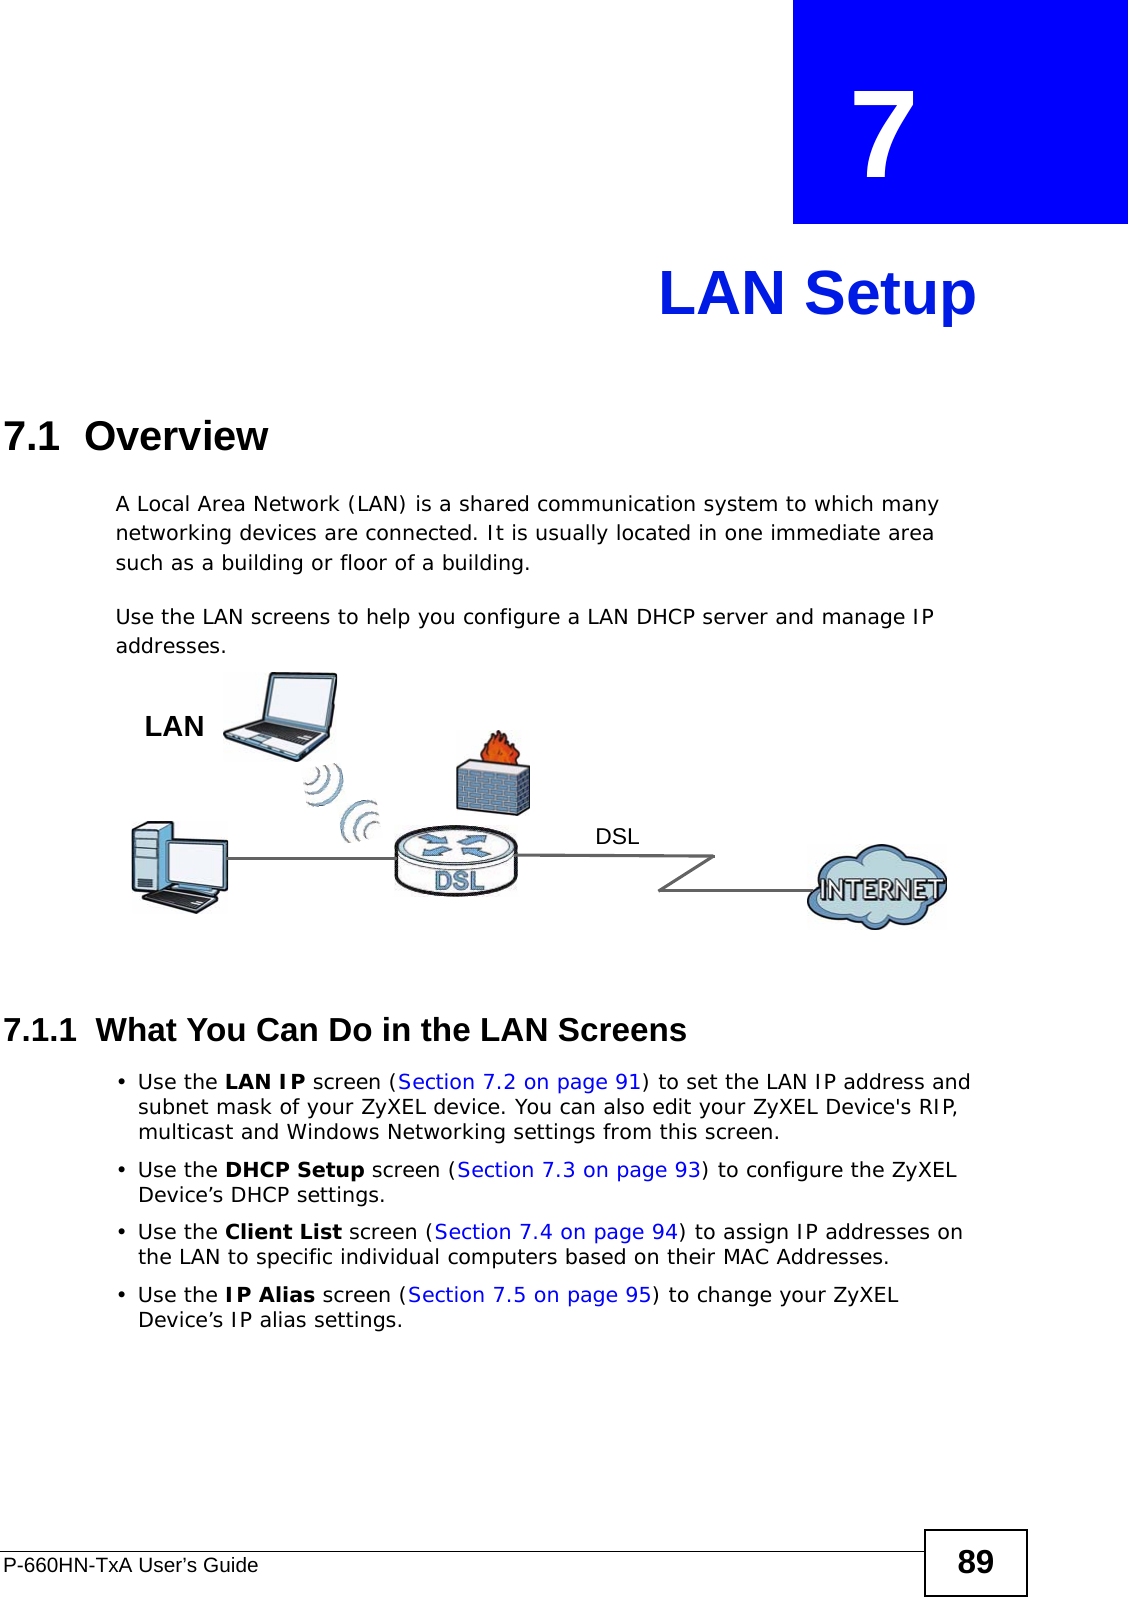 P-660HN-TxA User’s Guide 89CHAPTER  7 LAN Setup7.1  OverviewA Local Area Network (LAN) is a shared communication system to which many networking devices are connected. It is usually located in one immediate area such as a building or floor of a building.Use the LAN screens to help you configure a LAN DHCP server and manage IP addresses.7.1.1  What You Can Do in the LAN Screens•Use the LAN IP screen (Section 7.2 on page 91) to set the LAN IP address and subnet mask of your ZyXEL device. You can also edit your ZyXEL Device&apos;s RIP, multicast and Windows Networking settings from this screen.•Use the DHCP Setup screen (Section 7.3 on page 93) to configure the ZyXEL Device’s DHCP settings.•Use the Client List screen (Section 7.4 on page 94) to assign IP addresses on the LAN to specific individual computers based on their MAC Addresses. •Use the IP Alias screen (Section 7.5 on page 95) to change your ZyXEL Device’s IP alias settings.DSLLAN